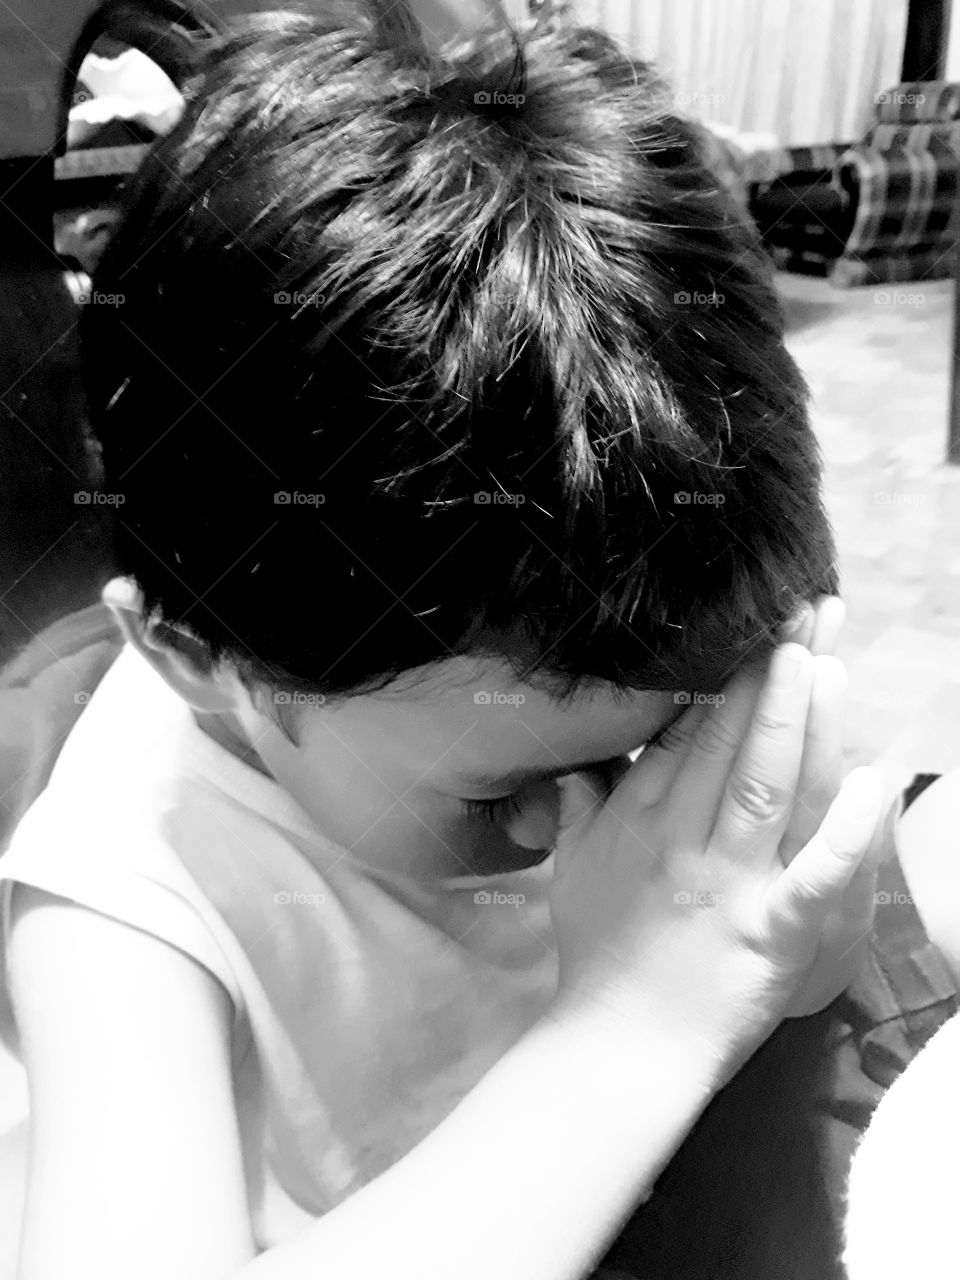 A toddler praying before meals.